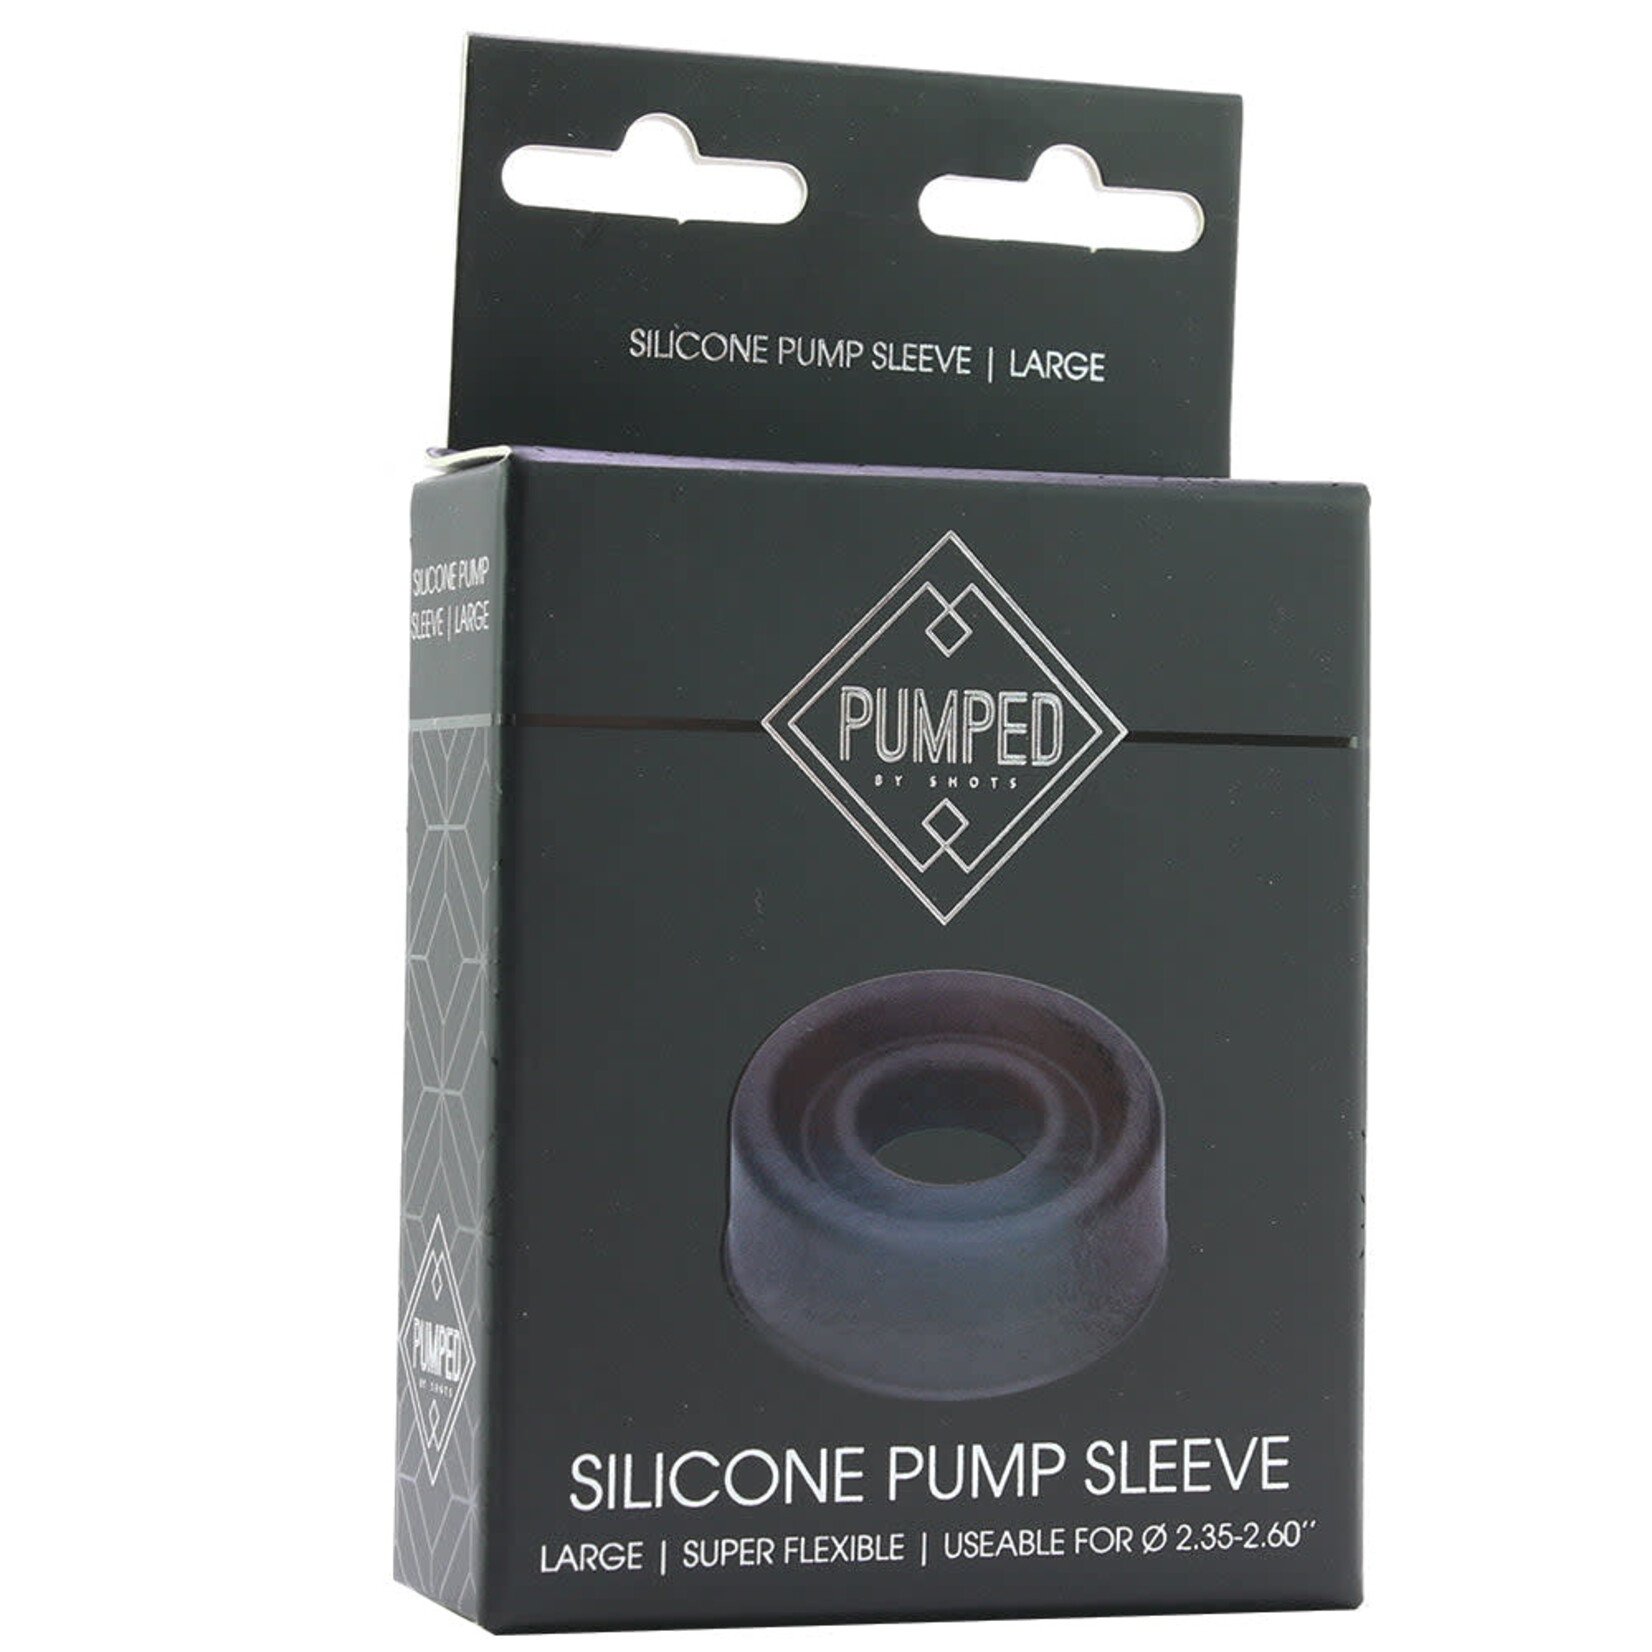 SHOTS PUMPED LARGE SILICONE PUMP SLEEVE